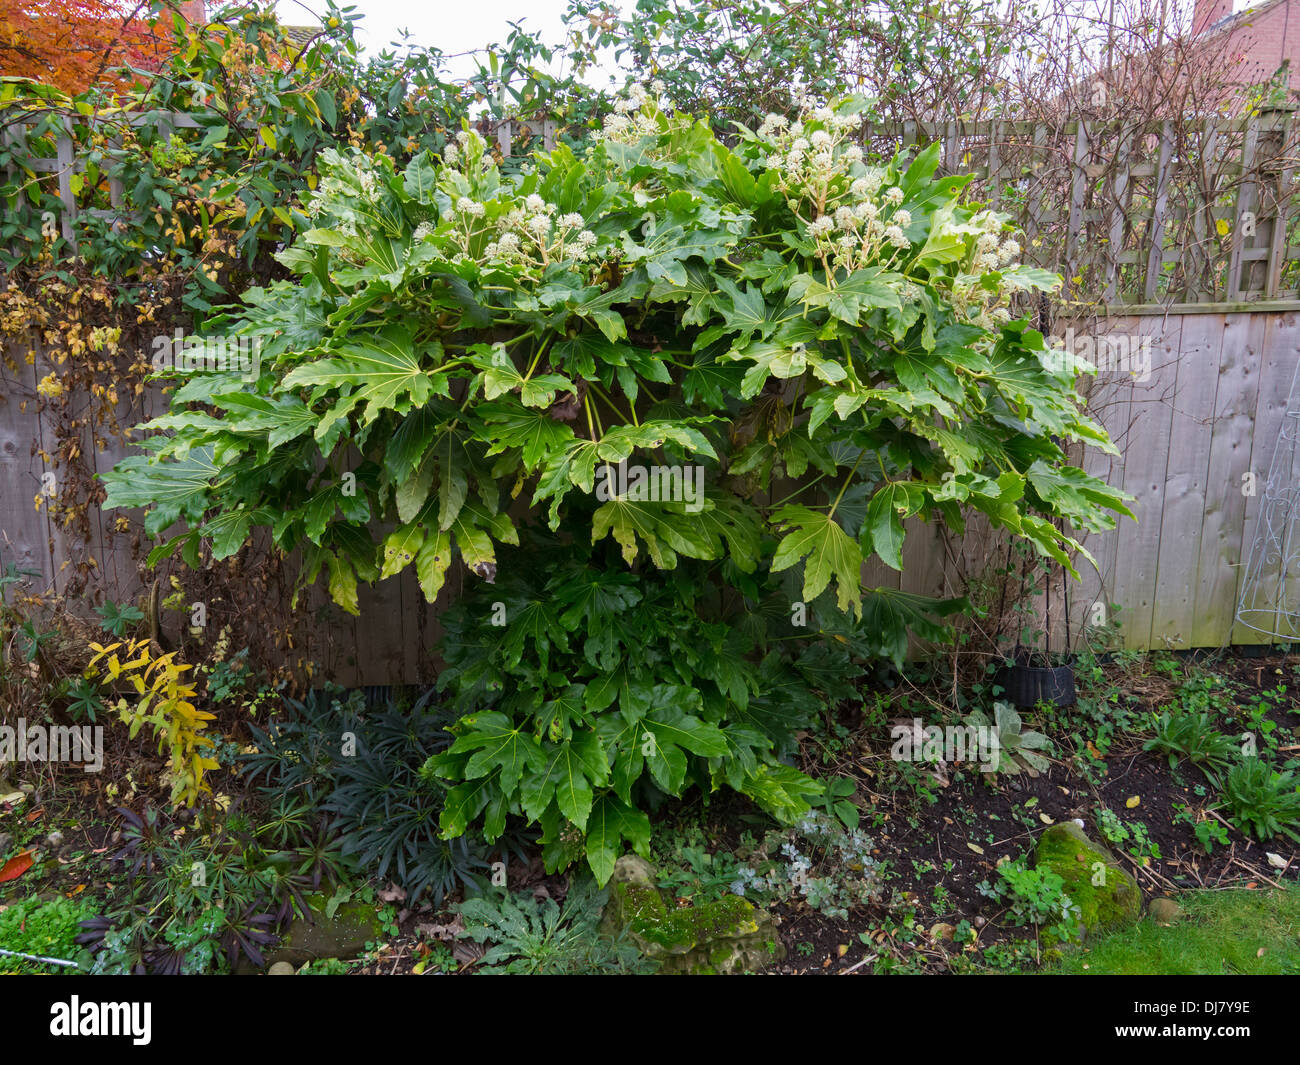 Fatsia japonica (Fatsi) or Japanese Aralia japonica flowering in England in late November 2013 Stock Photo